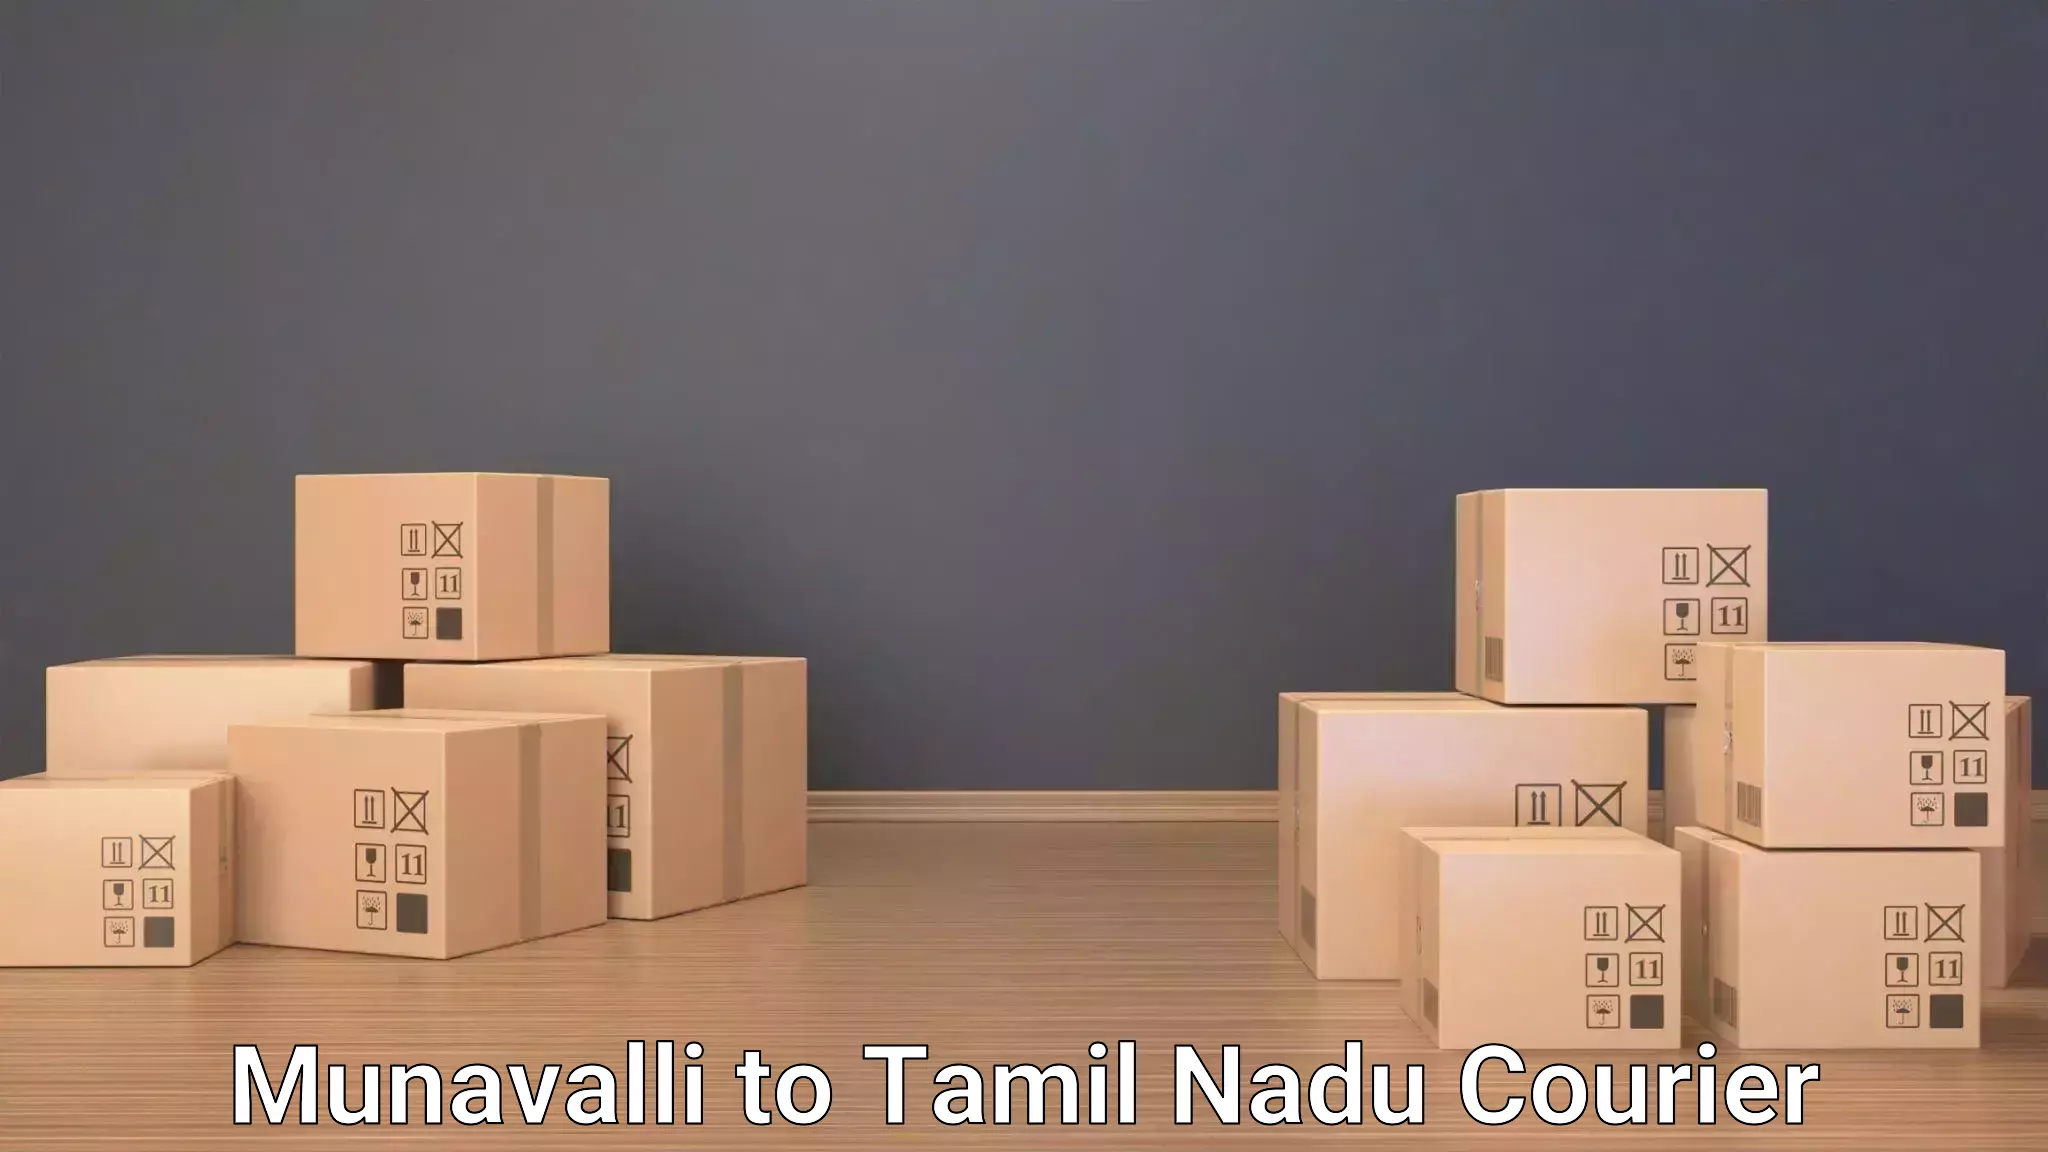 Luggage shipment processing Munavalli to Vellore Institute of Technology